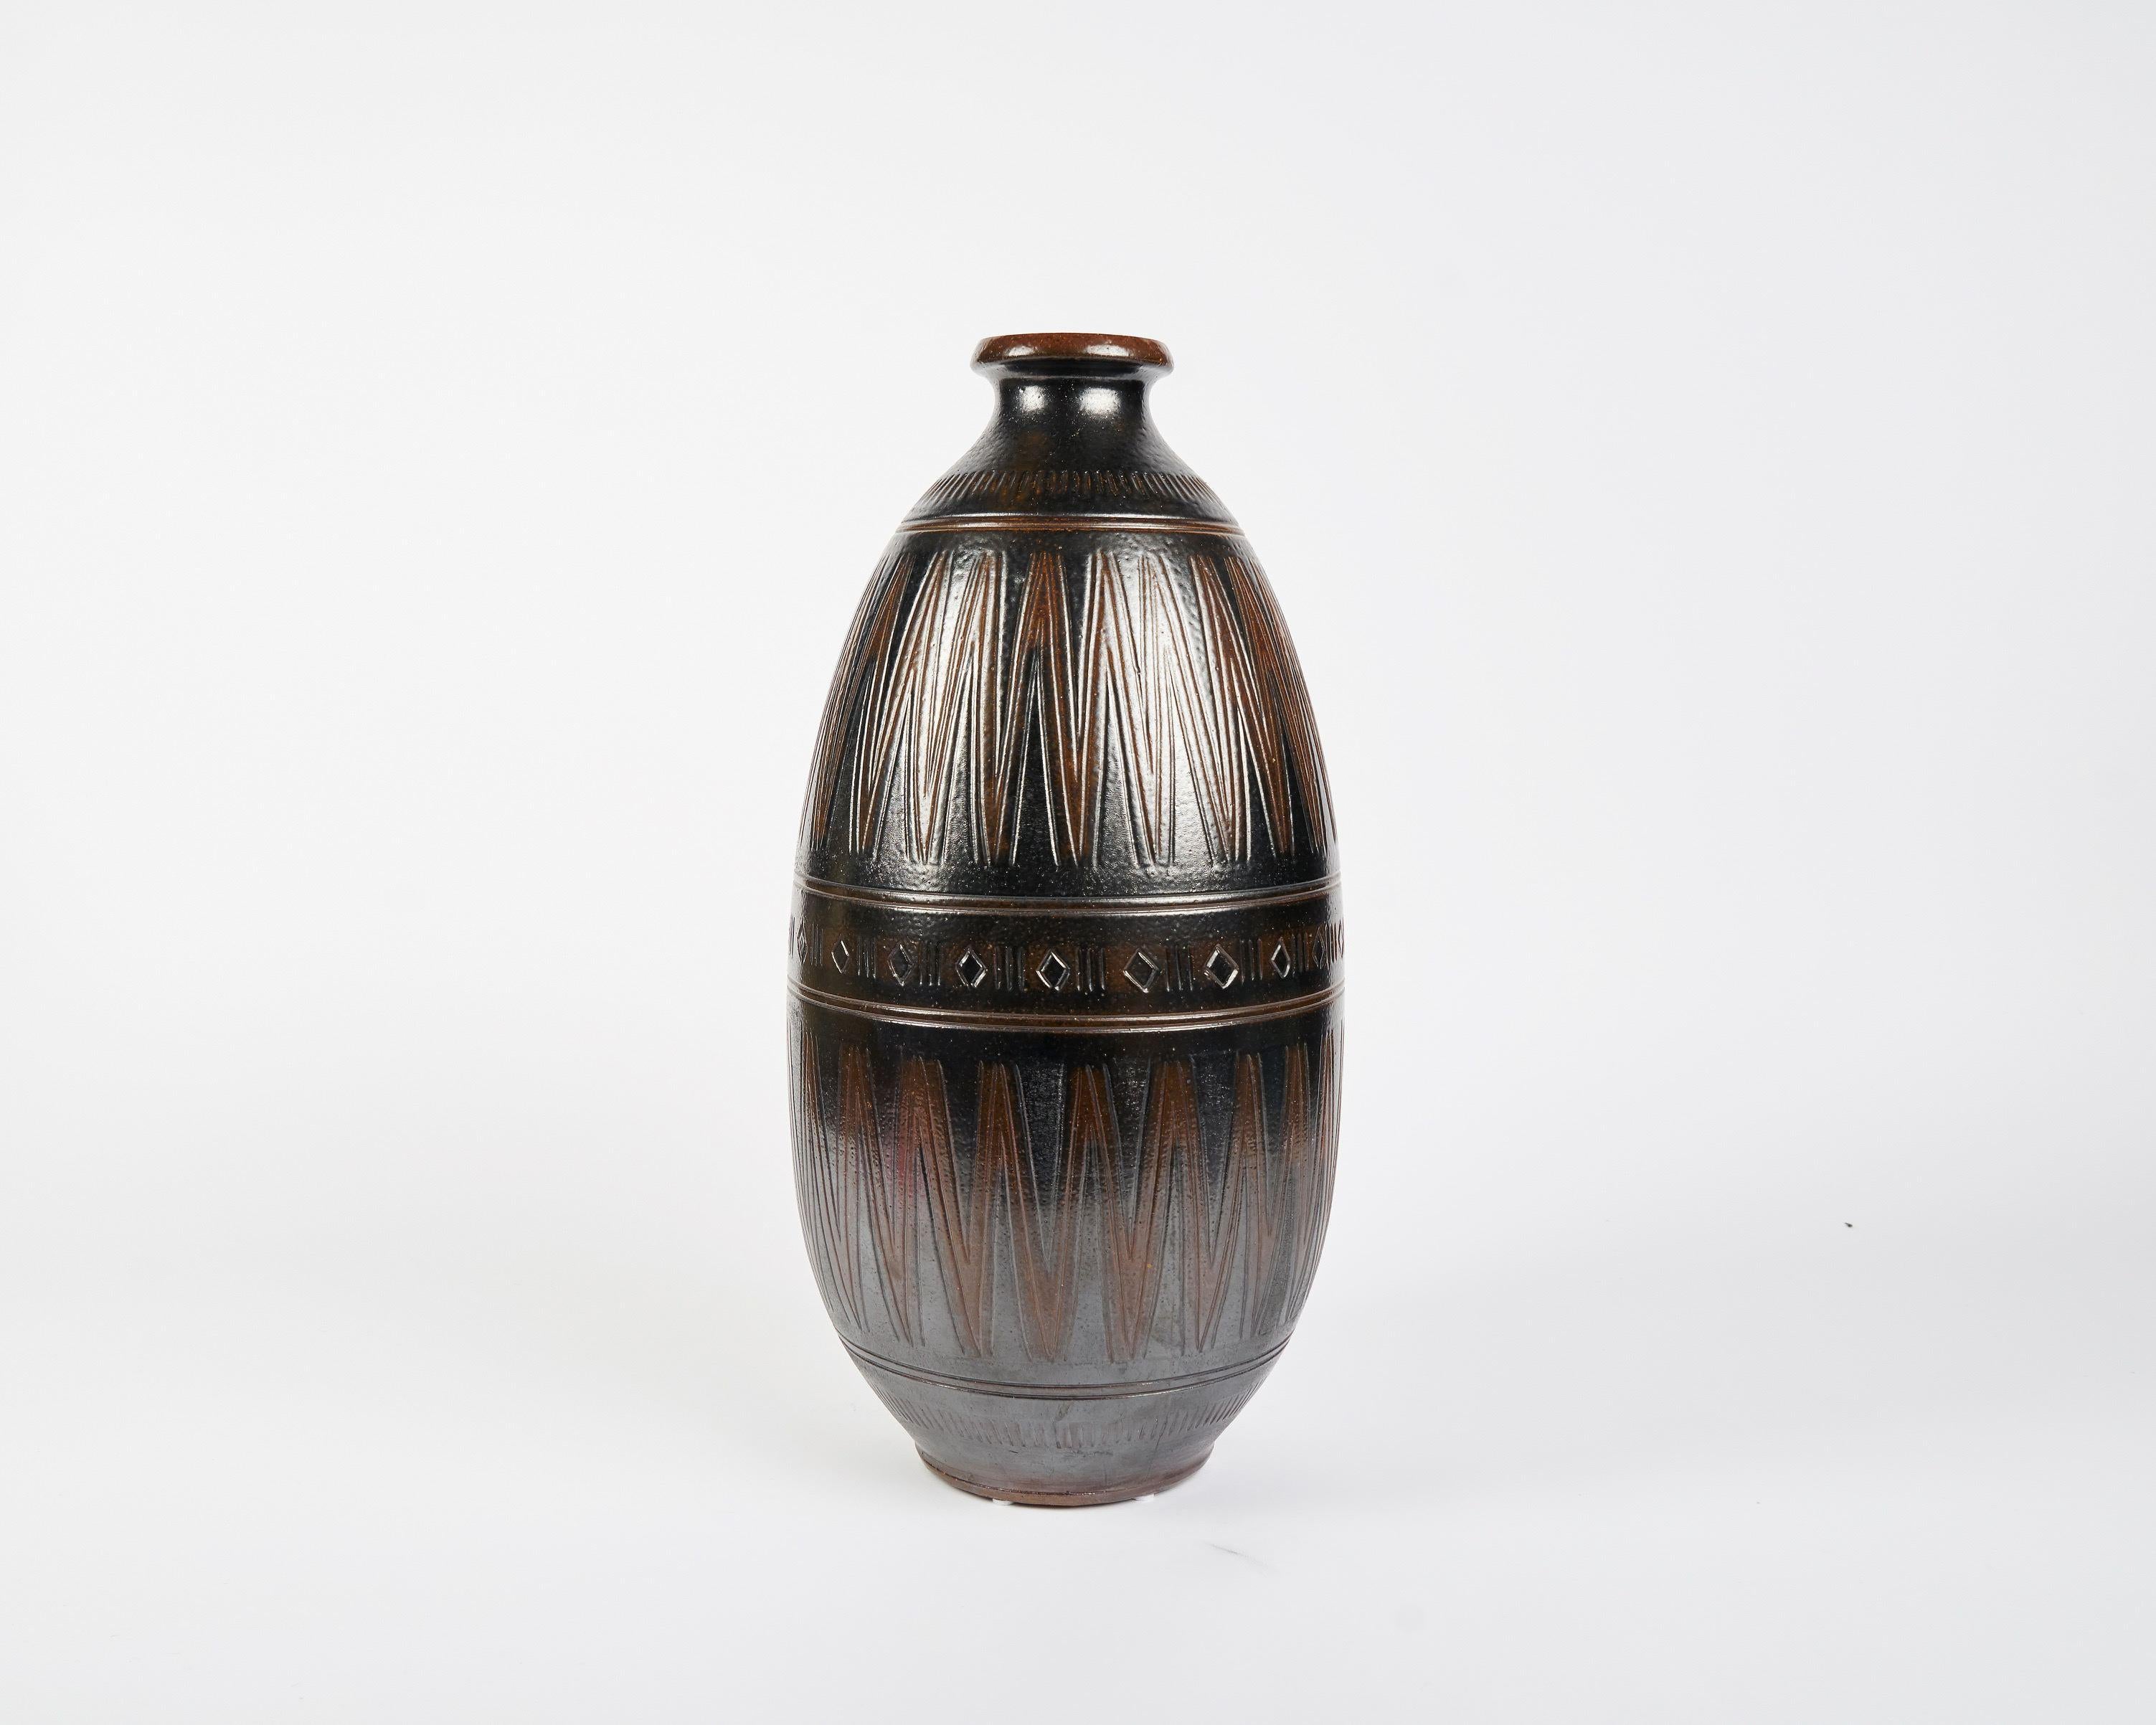 Created by the Swedish ceramist Arthur Andersson in the mid-20th century, these voluminous vases are noteworthy for their formal symmetry and their banded designs, which often run in either horizontal or vertical patterns of zig zags, striations, or